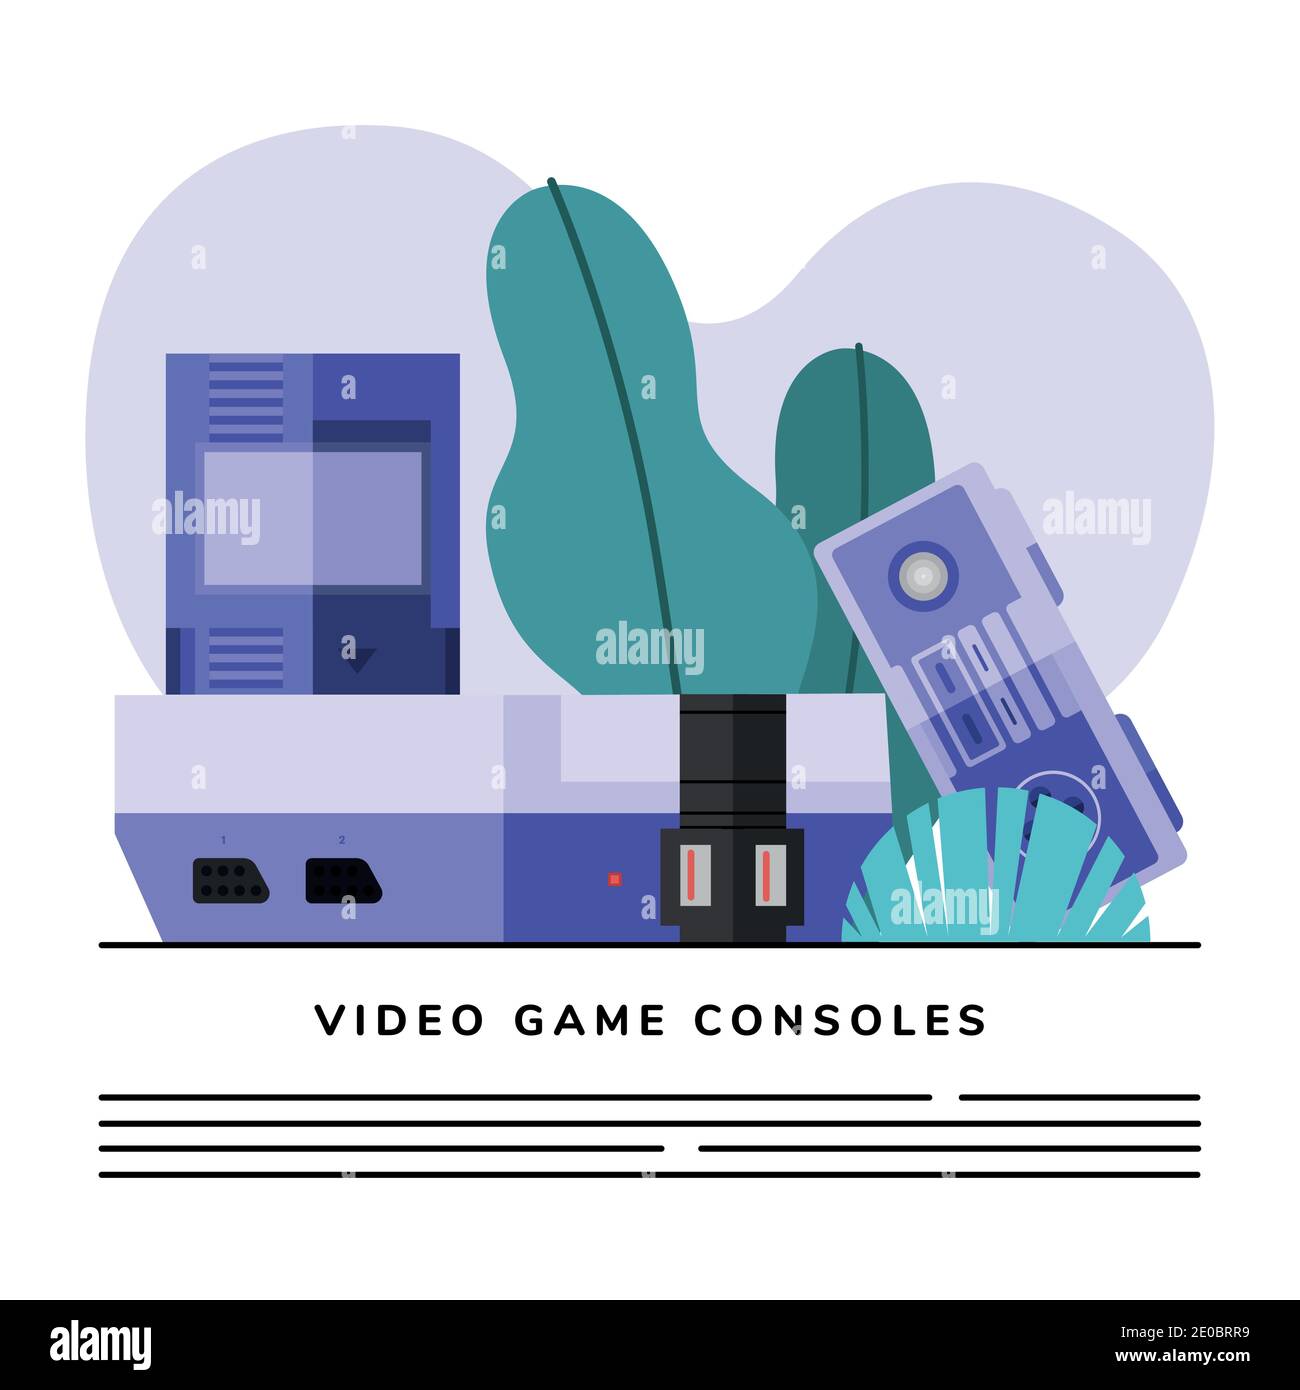 videogame consoles with leaves design, play leisure and gaming theme Vector illustration Stock Vector